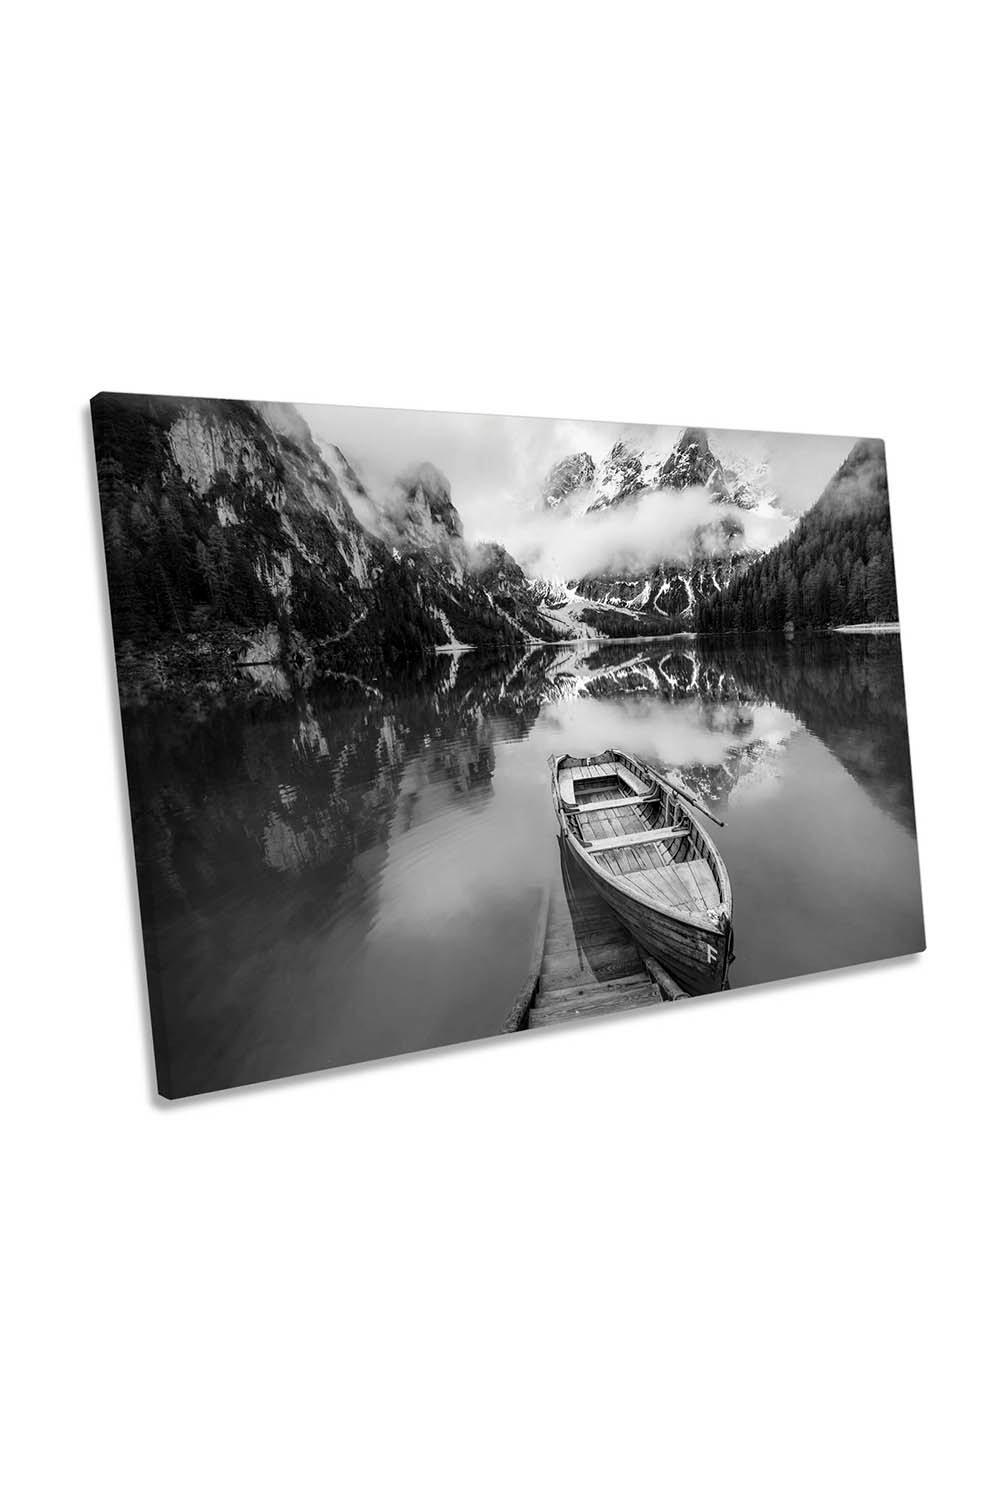 Lago di Braies Lake Italy Mountains Boat Canvas Wall Art Picture Print